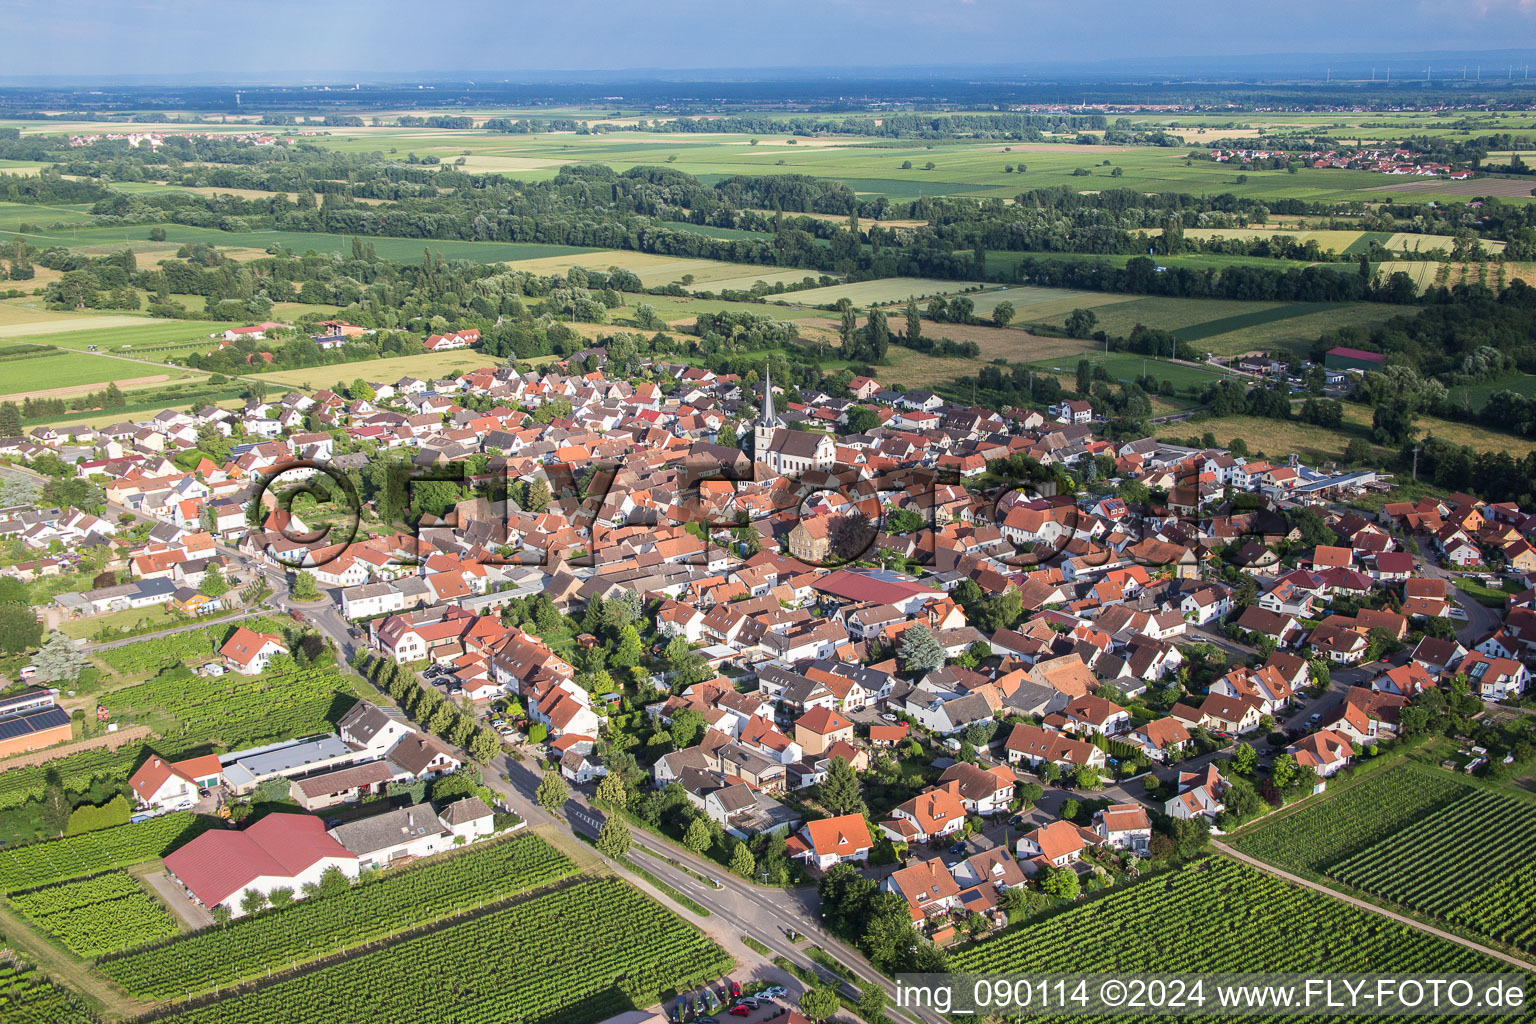 Village - view on the edge of agricultural fields and farmland in Venningen in the state Rhineland-Palatinate, Germany from above